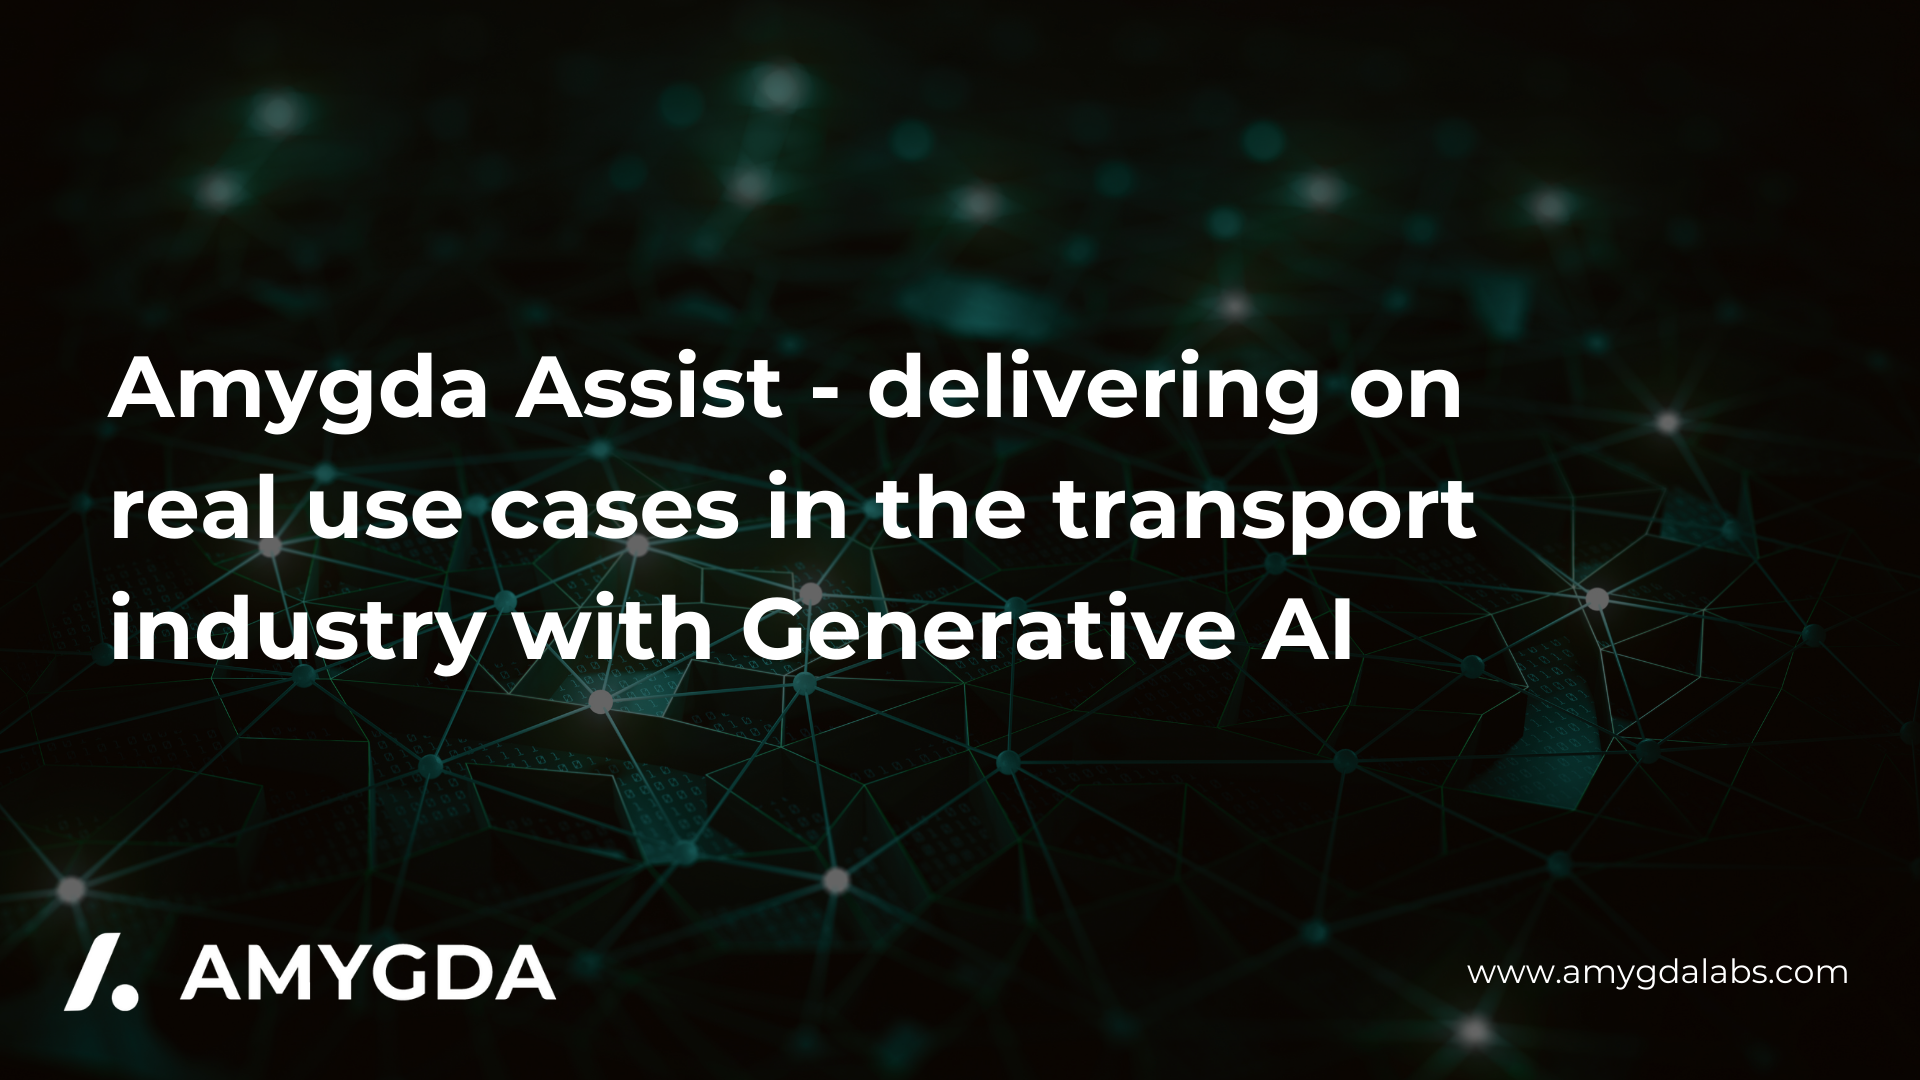 Amygda Assist use cases in the Transport industry